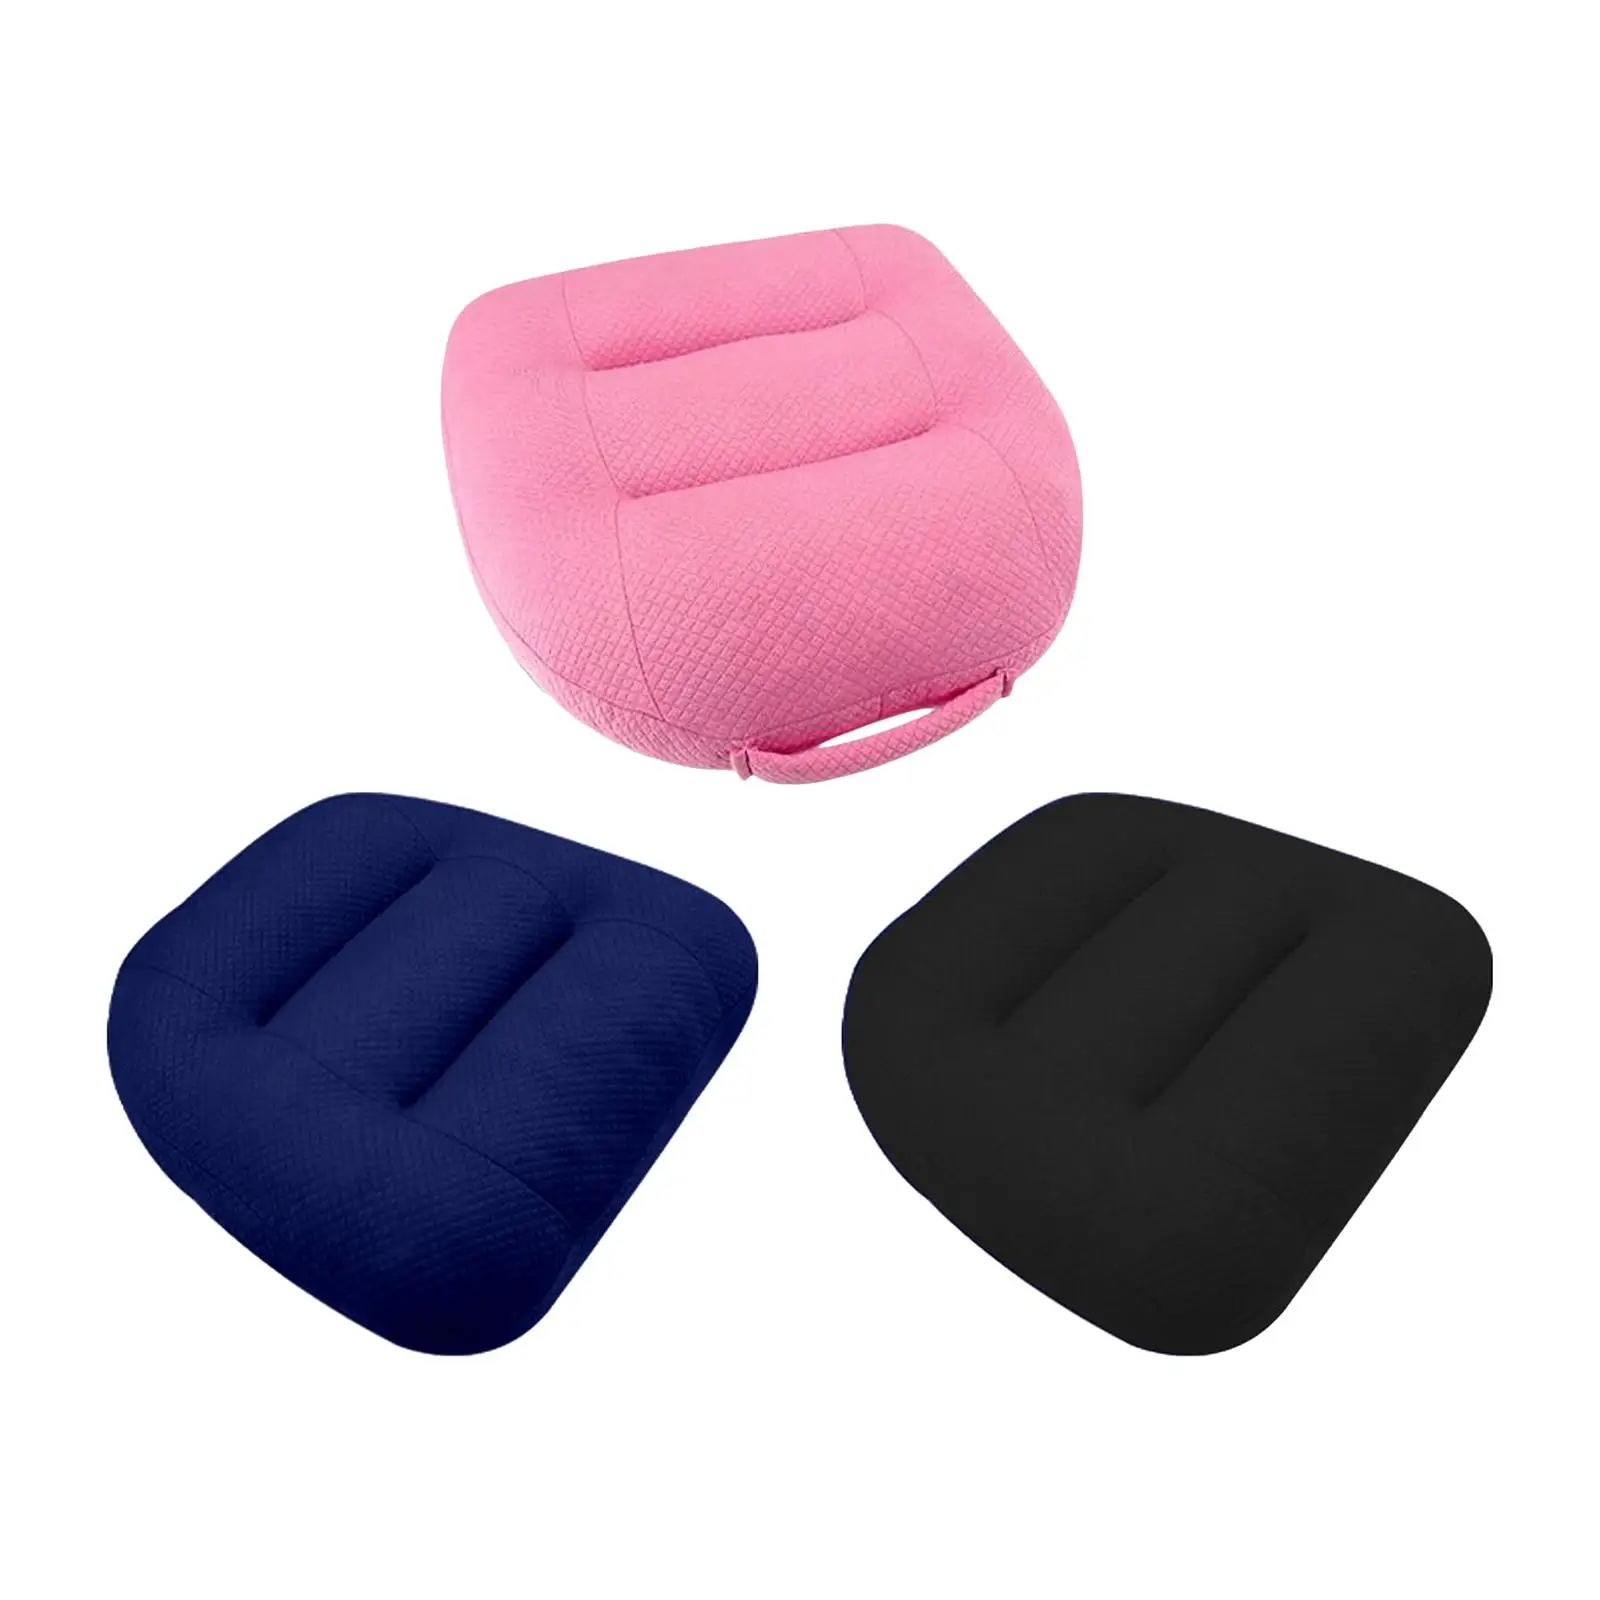 Car Booster Seat Cushion Car Seat Pad Breathable Fabric Thickened Nonslip Auto Seat Cover for Suvs Vehicles Van Trucks Cars